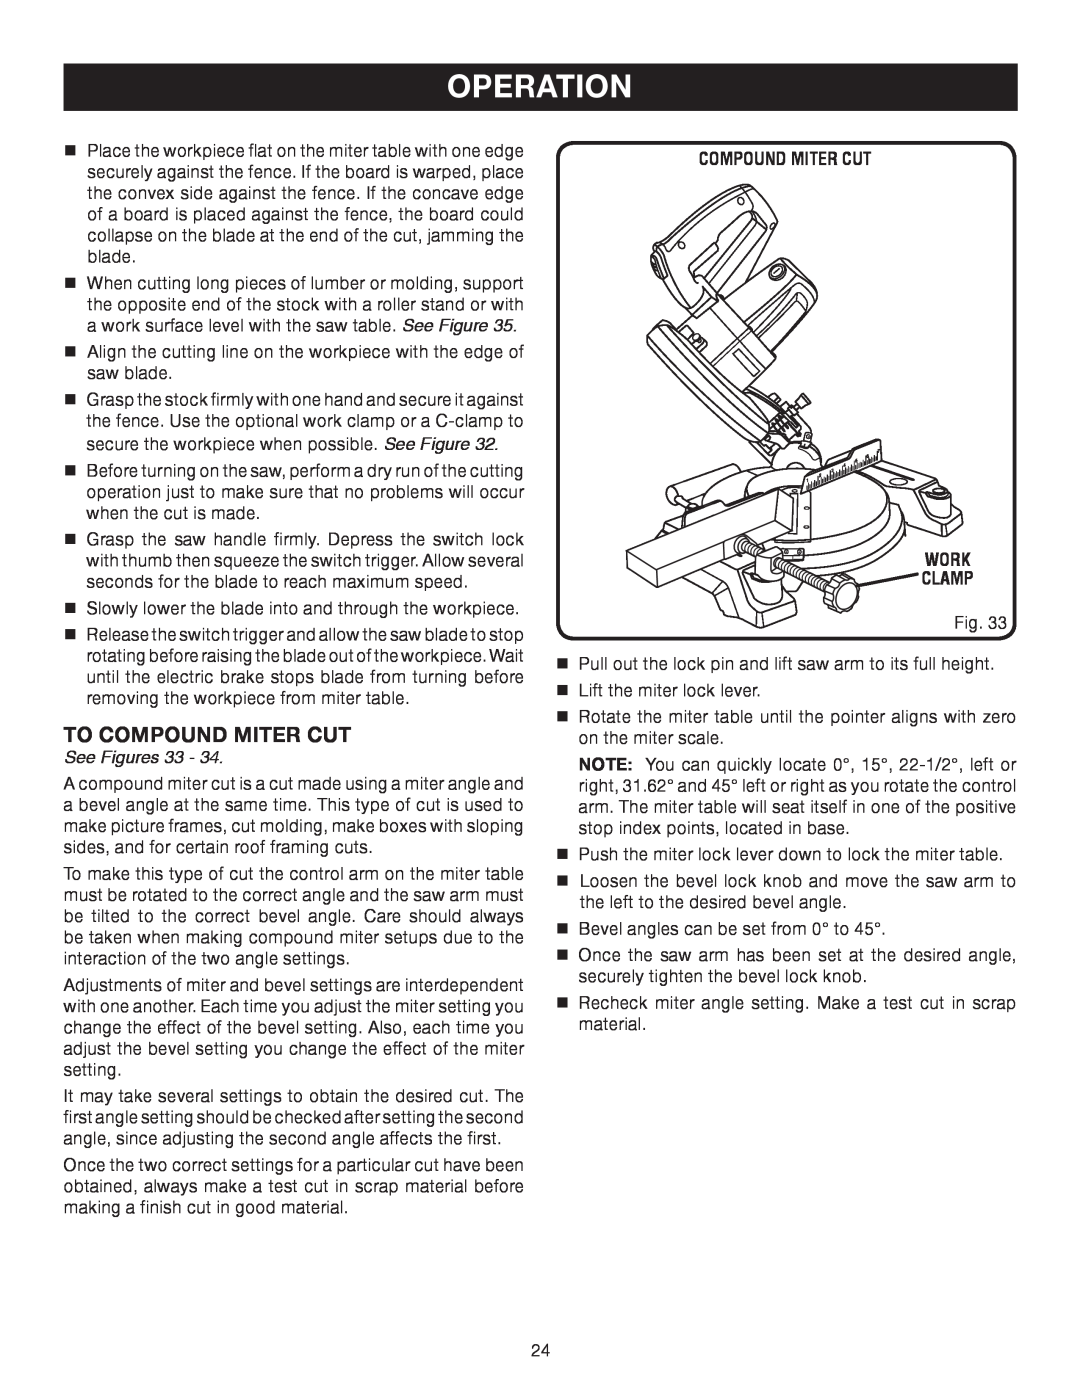 Ryobi TS1141 manual Operation, to Compound Miter Cut, See Figures 33, Compound Miter Cut Work CLAMP 